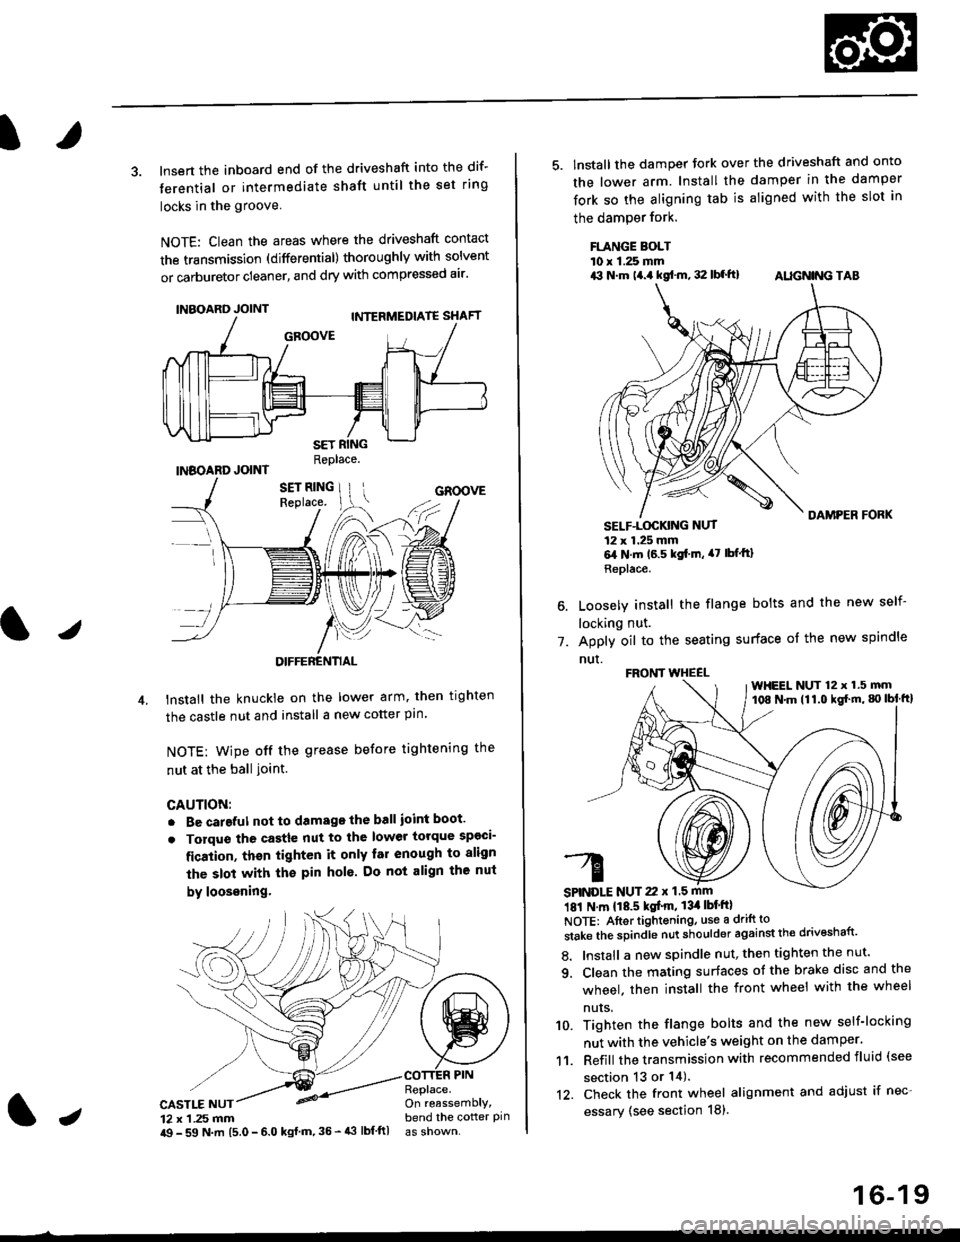 HONDA CIVIC 1996 6.G Workshop Manual 3. lnsert the inboard end of the driveshaft into the dif-
terential or intermediate shaft until the set ring
locks in the groove
NOTE: Clean the areas where the driveshaft contact
the transmission (di